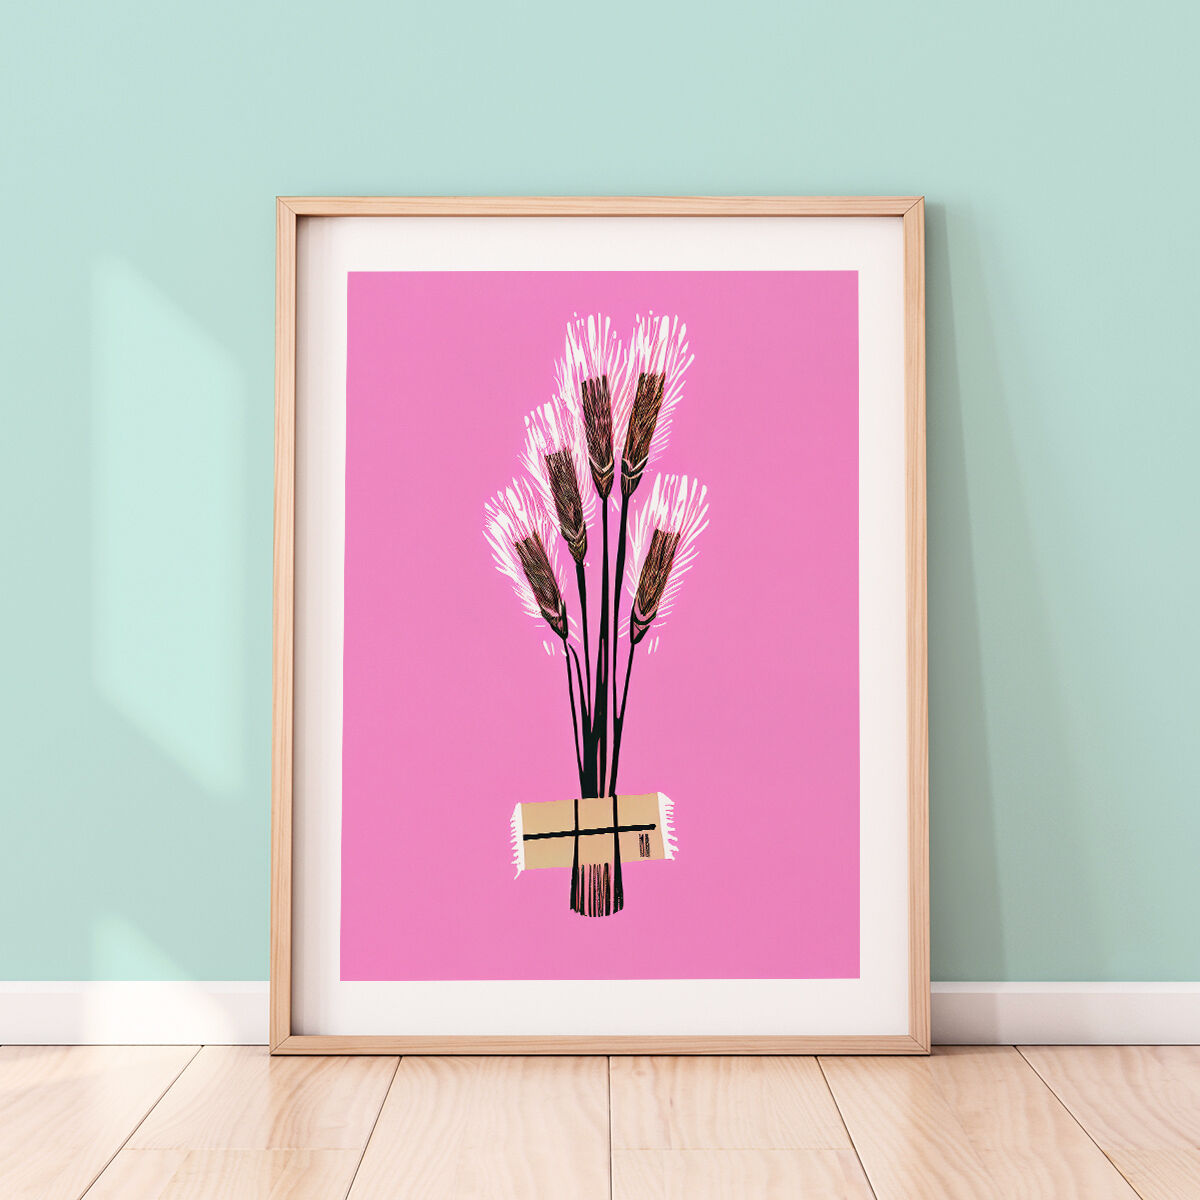 Drift into a dreamy state with our 'Beautiful Pampas Dreamy Grasses' print. 🌾💭 The perfect addition to your calming nook. #ArtPrints #ArtLovers #PeacefulArt #NatureInspired

🛍️ Shop on Etsy: etsy.com/de-en/listing/…